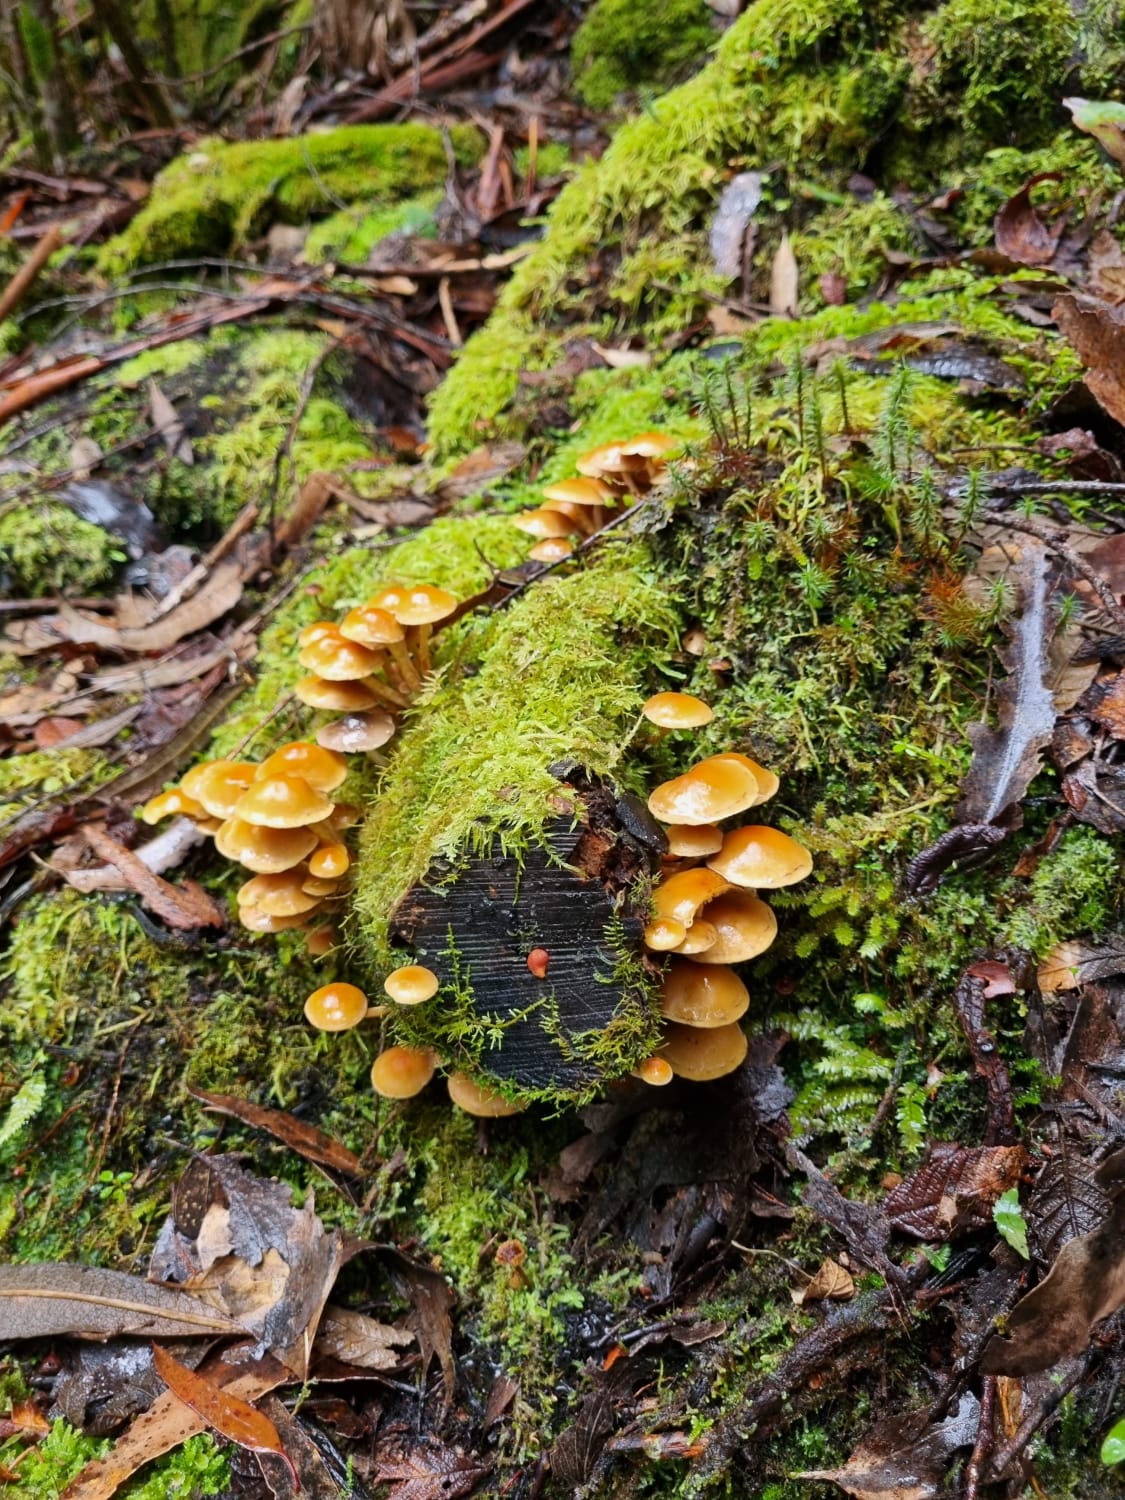 I would love some help identifying these its in Tasmania